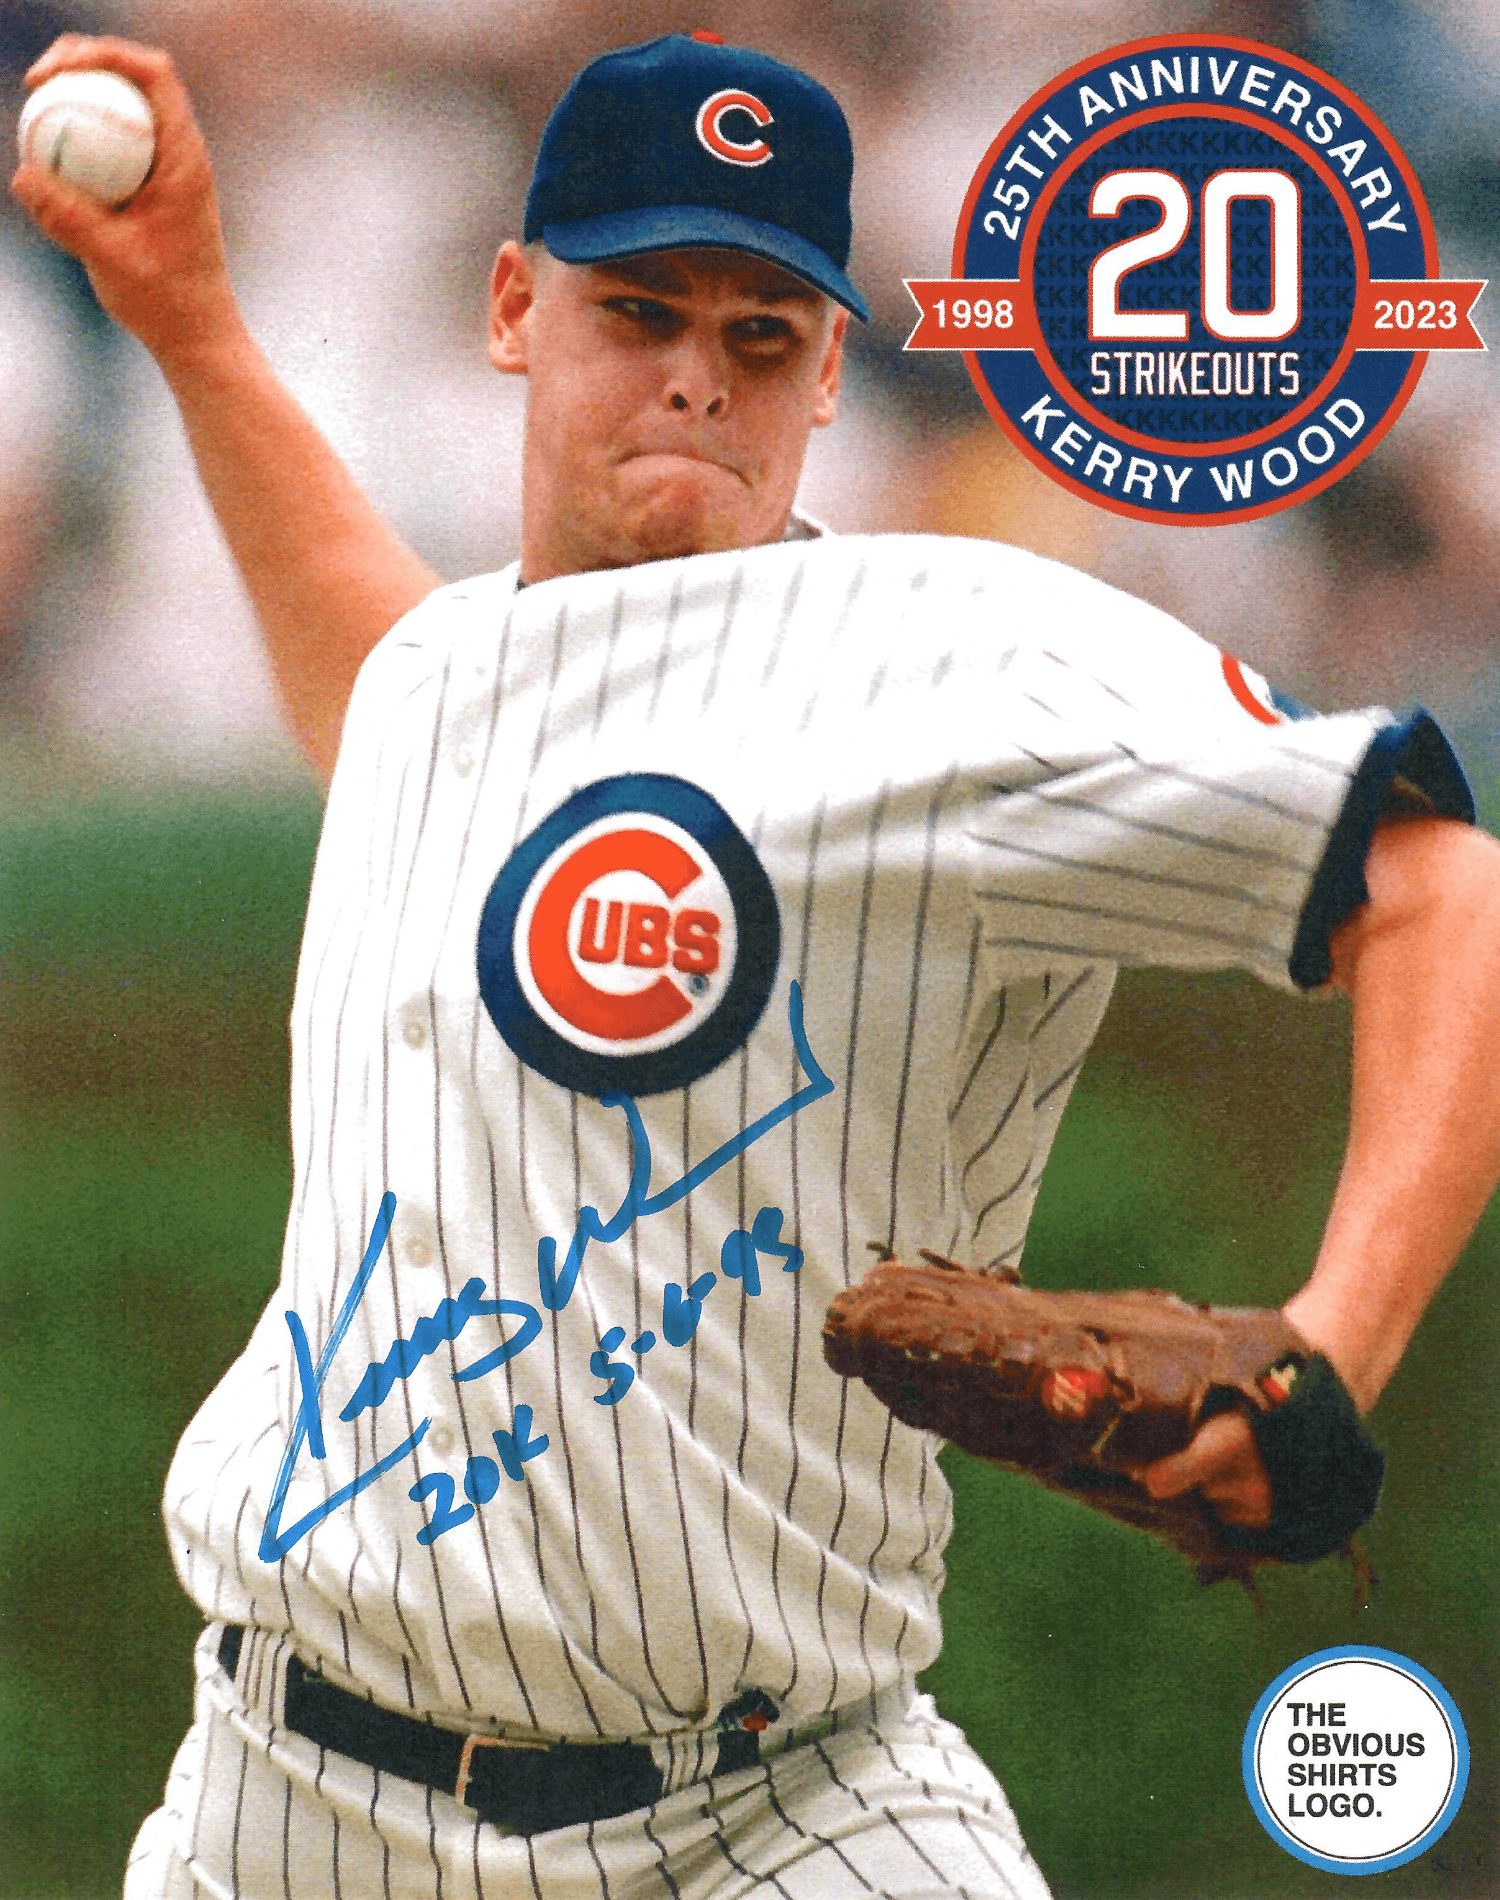 Cubs fans celebrate 25th anniversary of Kerry Wood's 20-strikeout